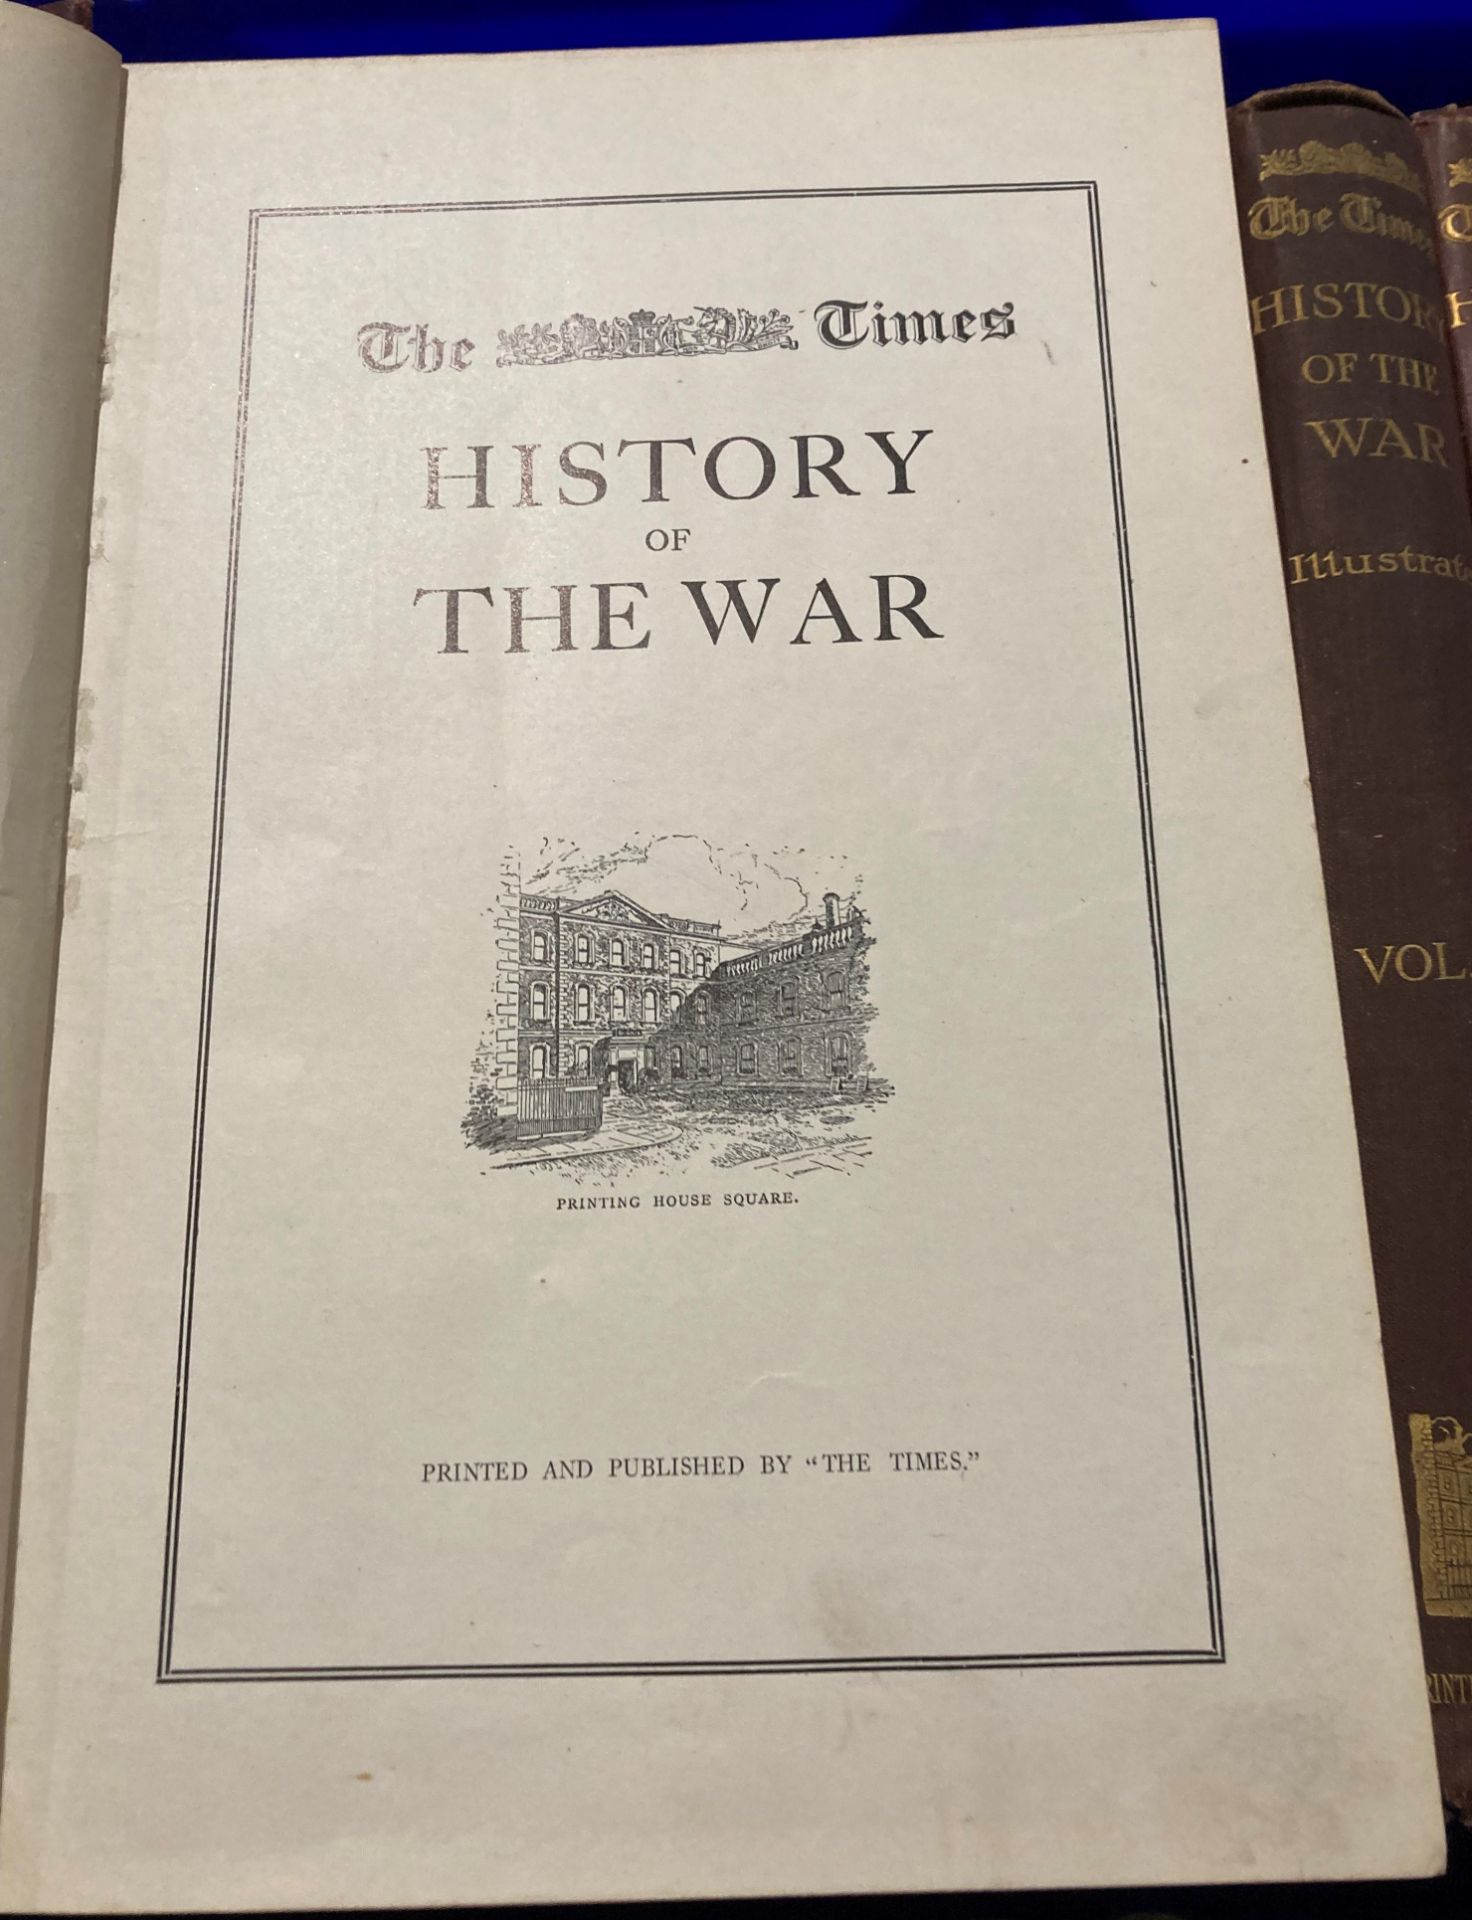 Contents to blue crate - 12 volumes 'The Times History of War' (volumes 1-8, 13, - Image 3 of 3